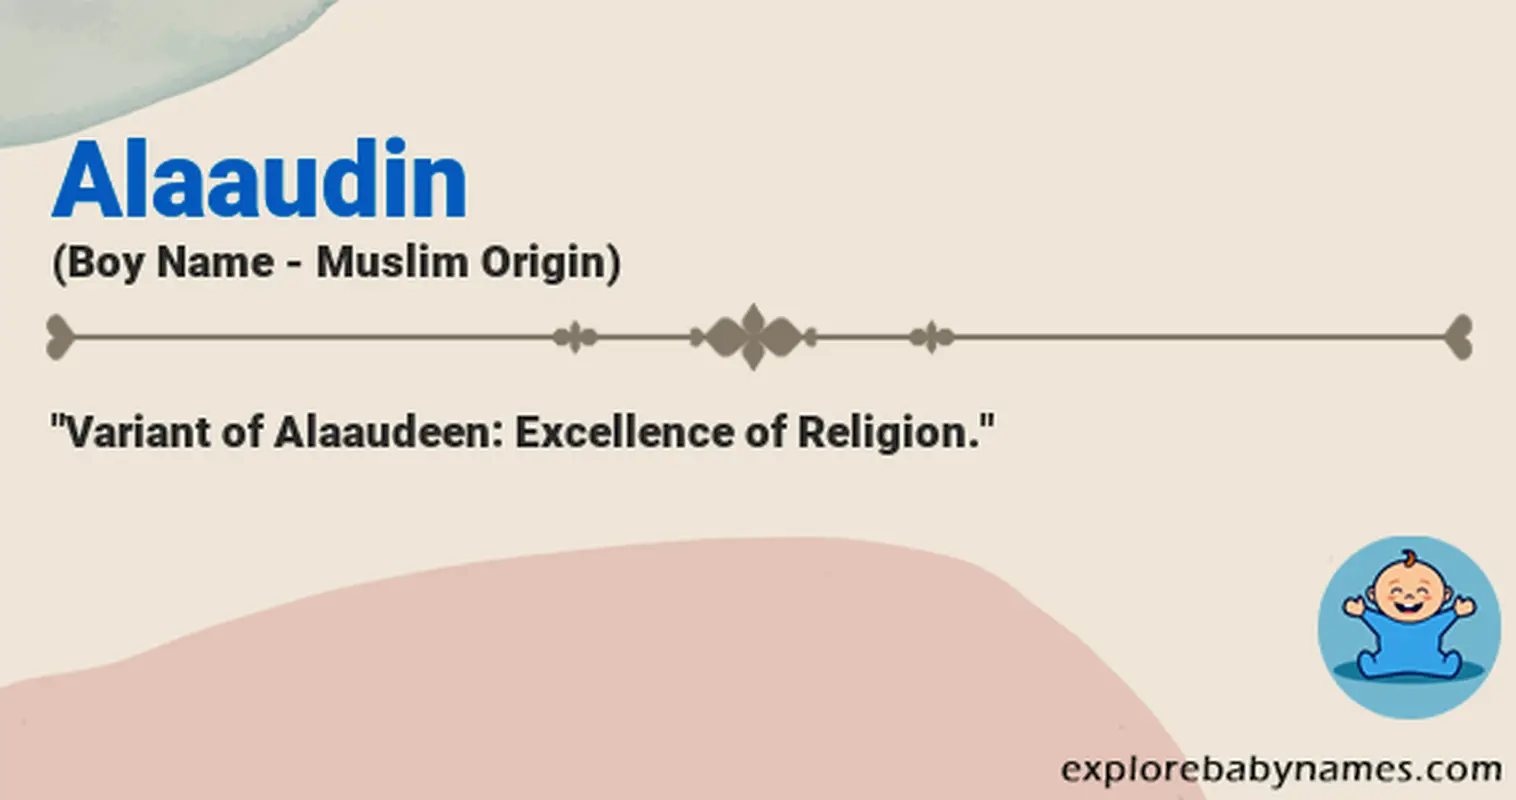 Meaning of Alaaudin